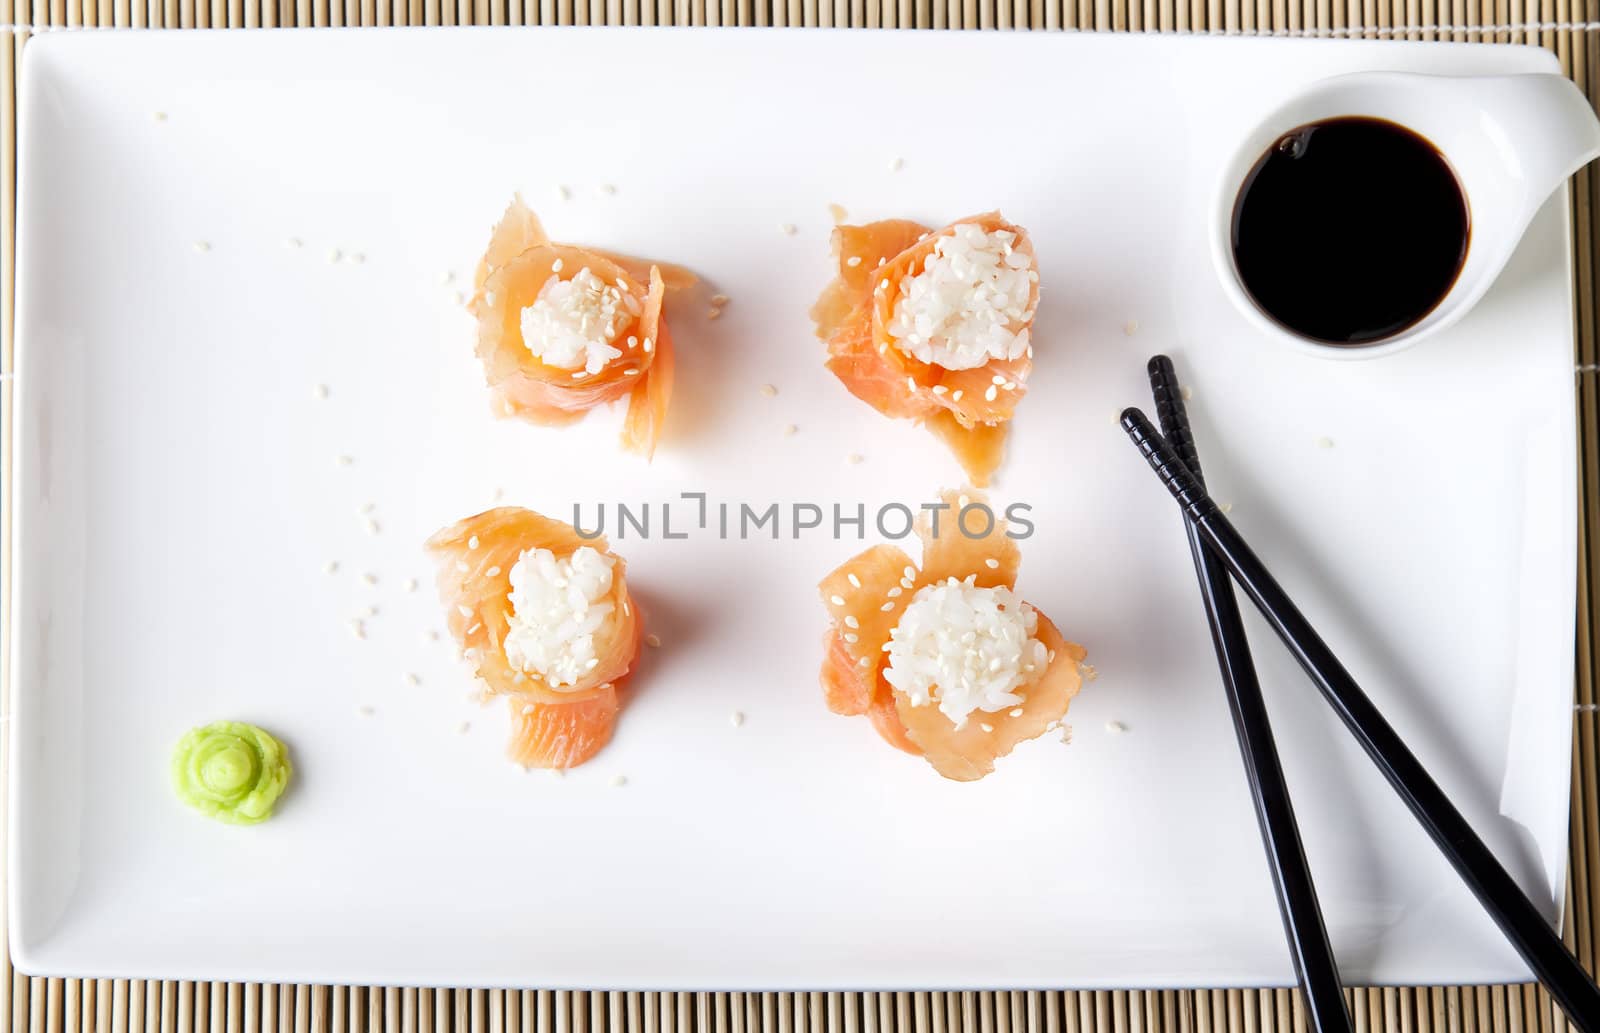 Fresh salmon sushi, filled with rice and sprinkled with sesame seeds.